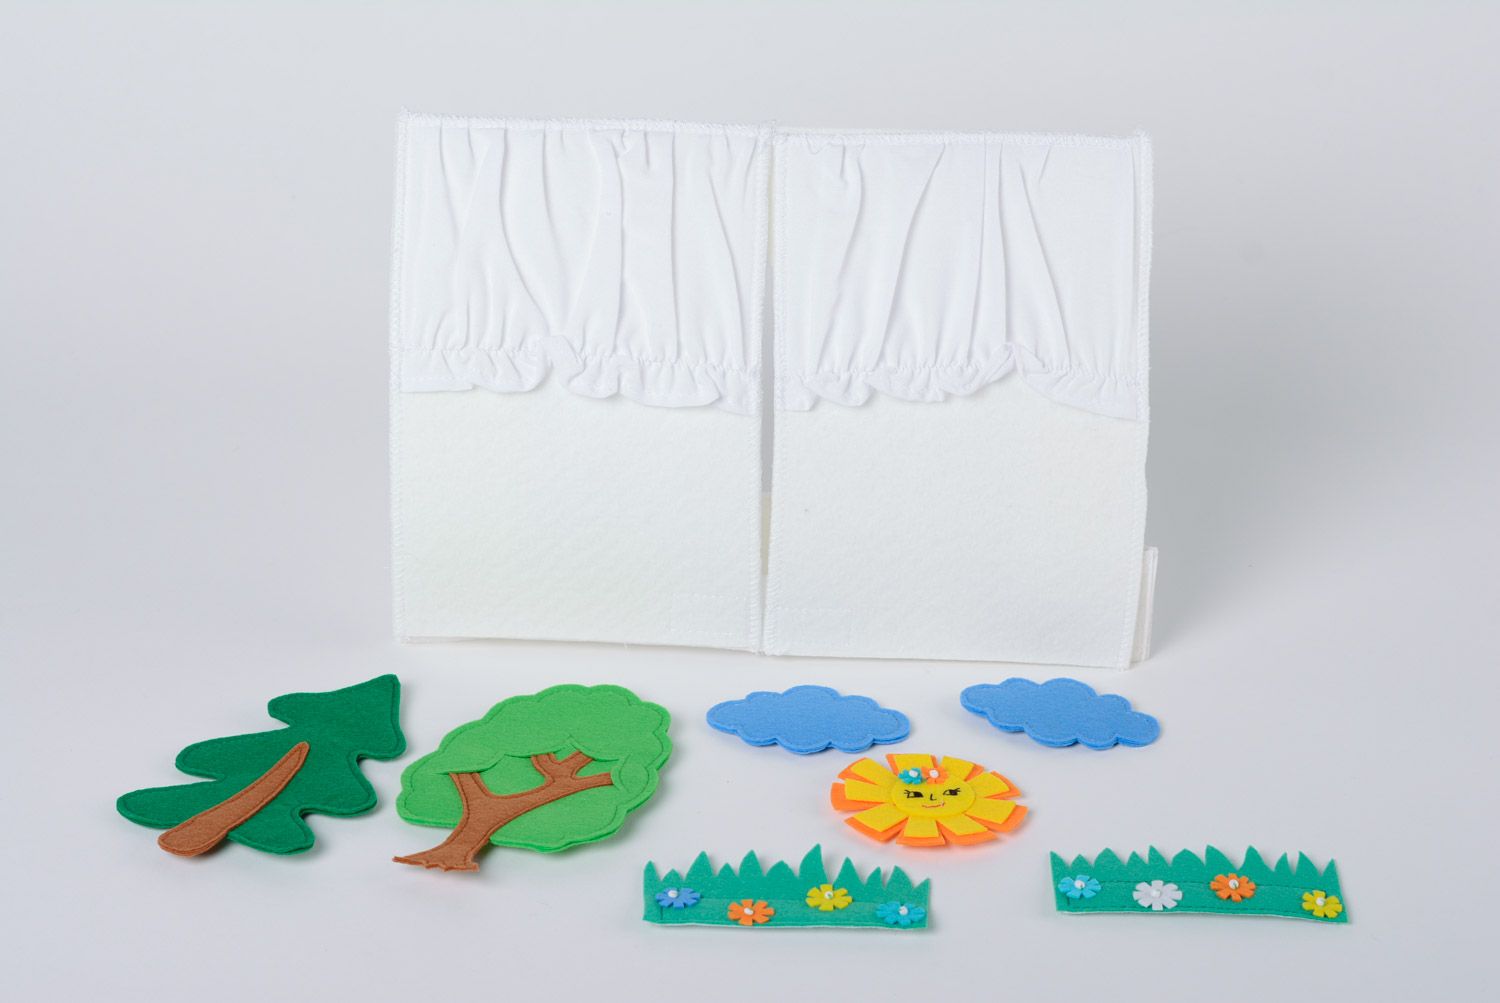 Handmade multi-colored desktop felt puppet theater with folding screen and scenery photo 1